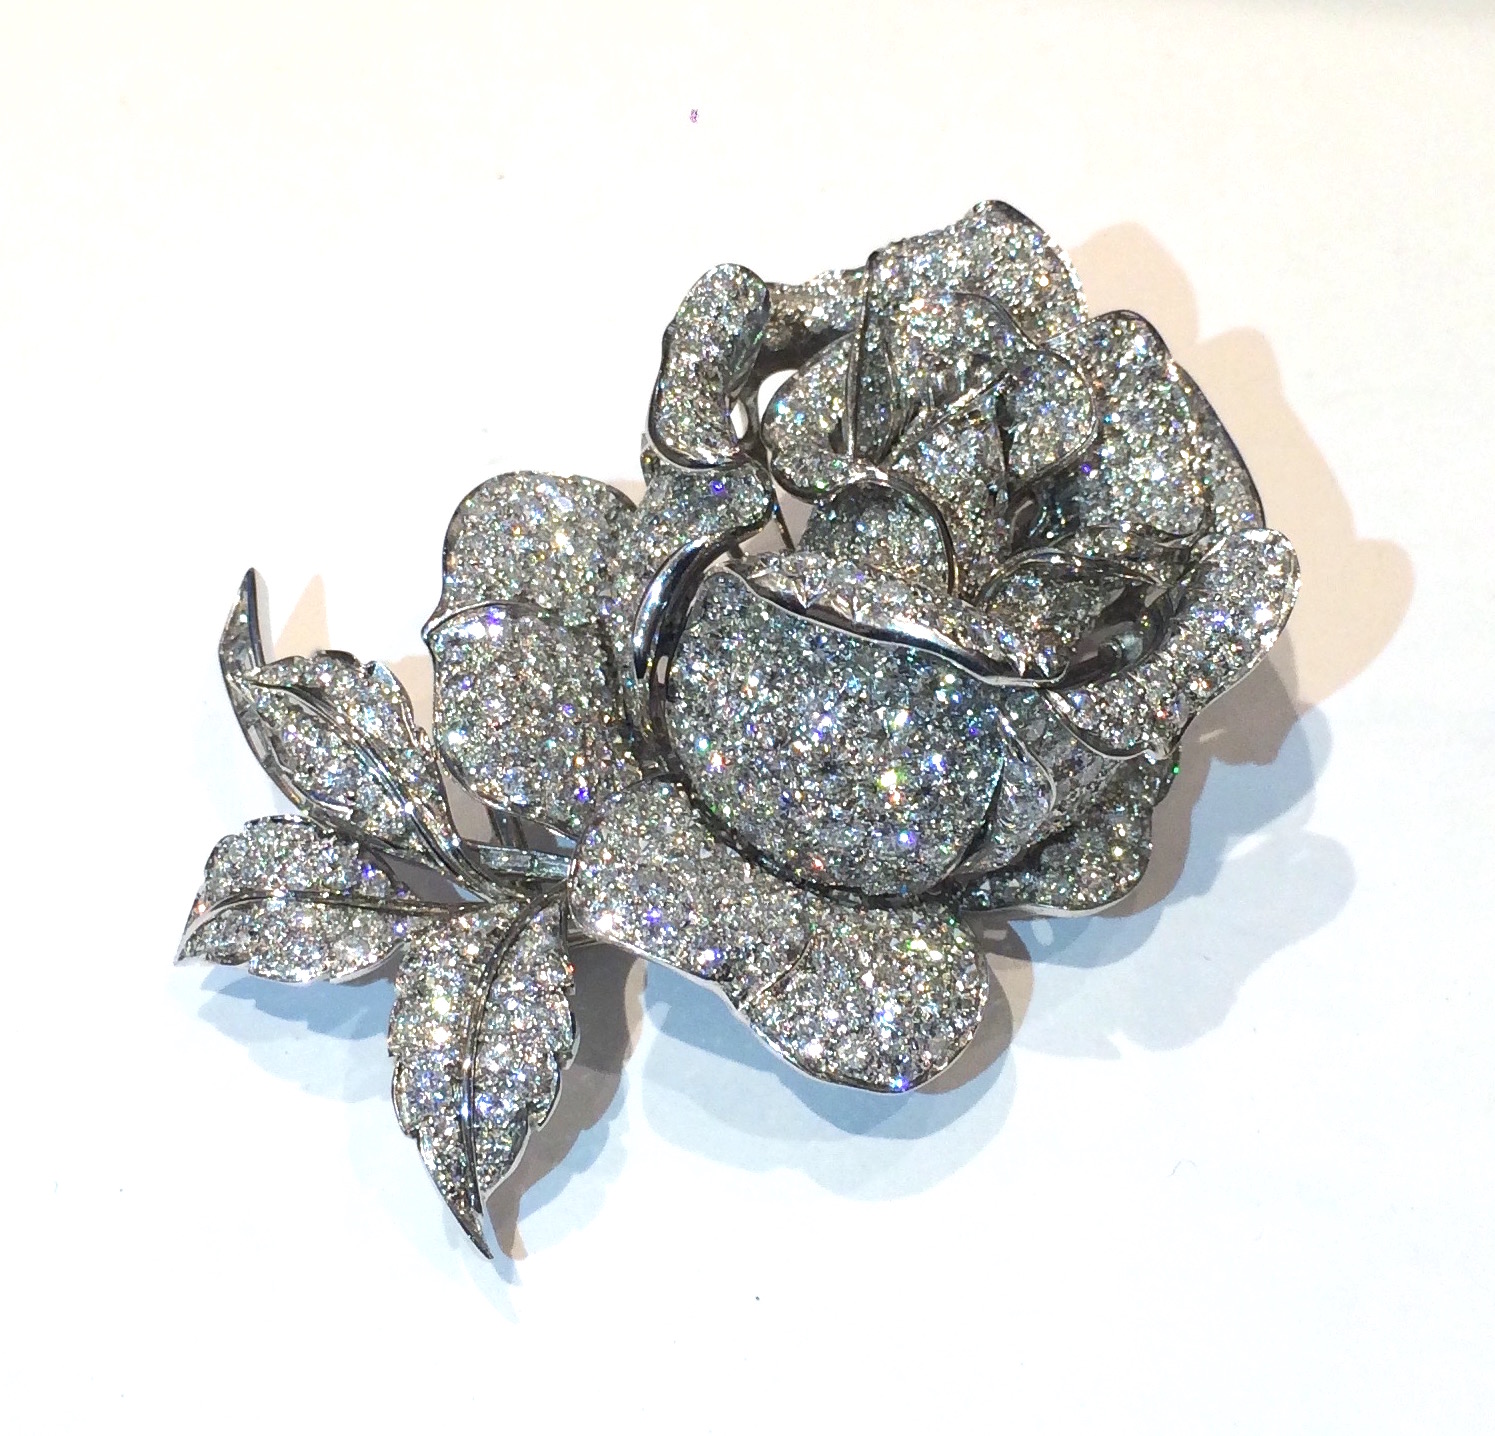 Paul Flato, sculptural “Rose” brooch, pave diamonds (approx. 40 carats TW) set in platinum, c. 1930’s